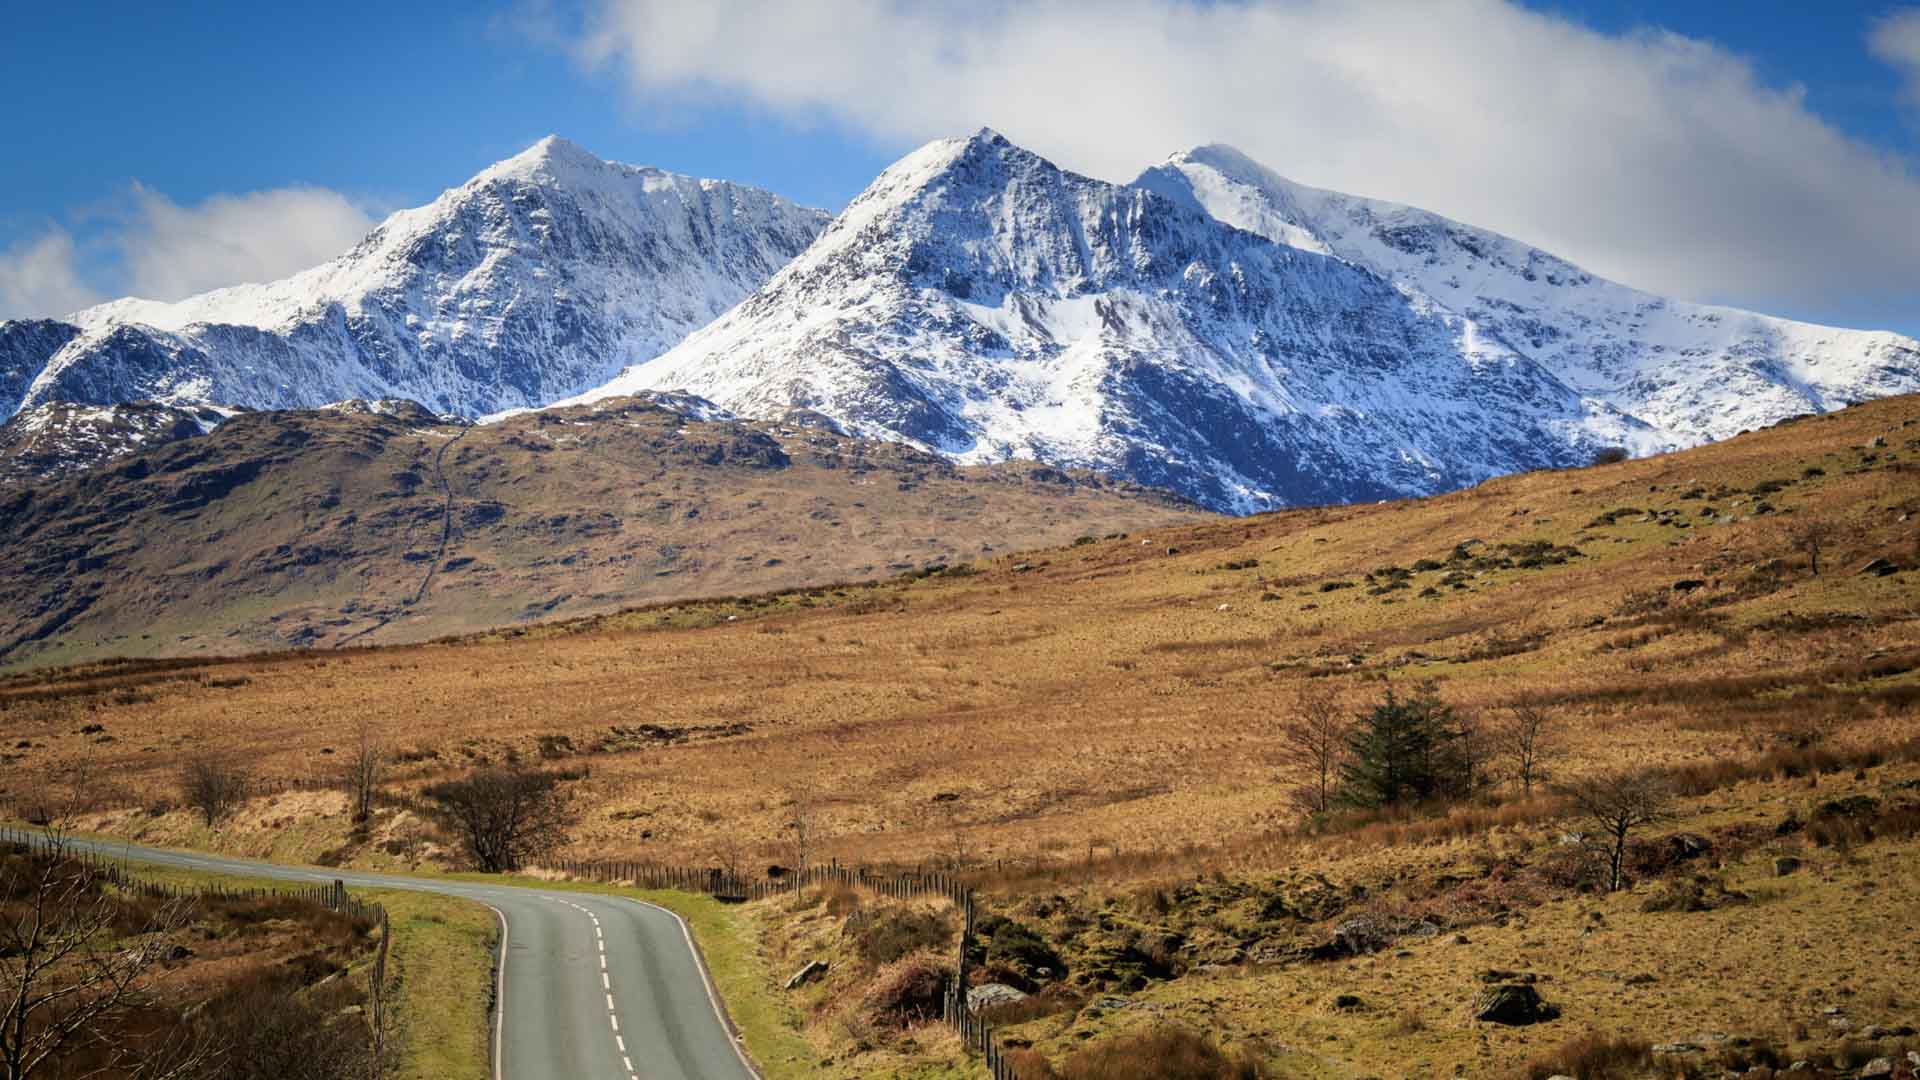 Cycling Snowdonia, North Wales: where to go, ride and stay!